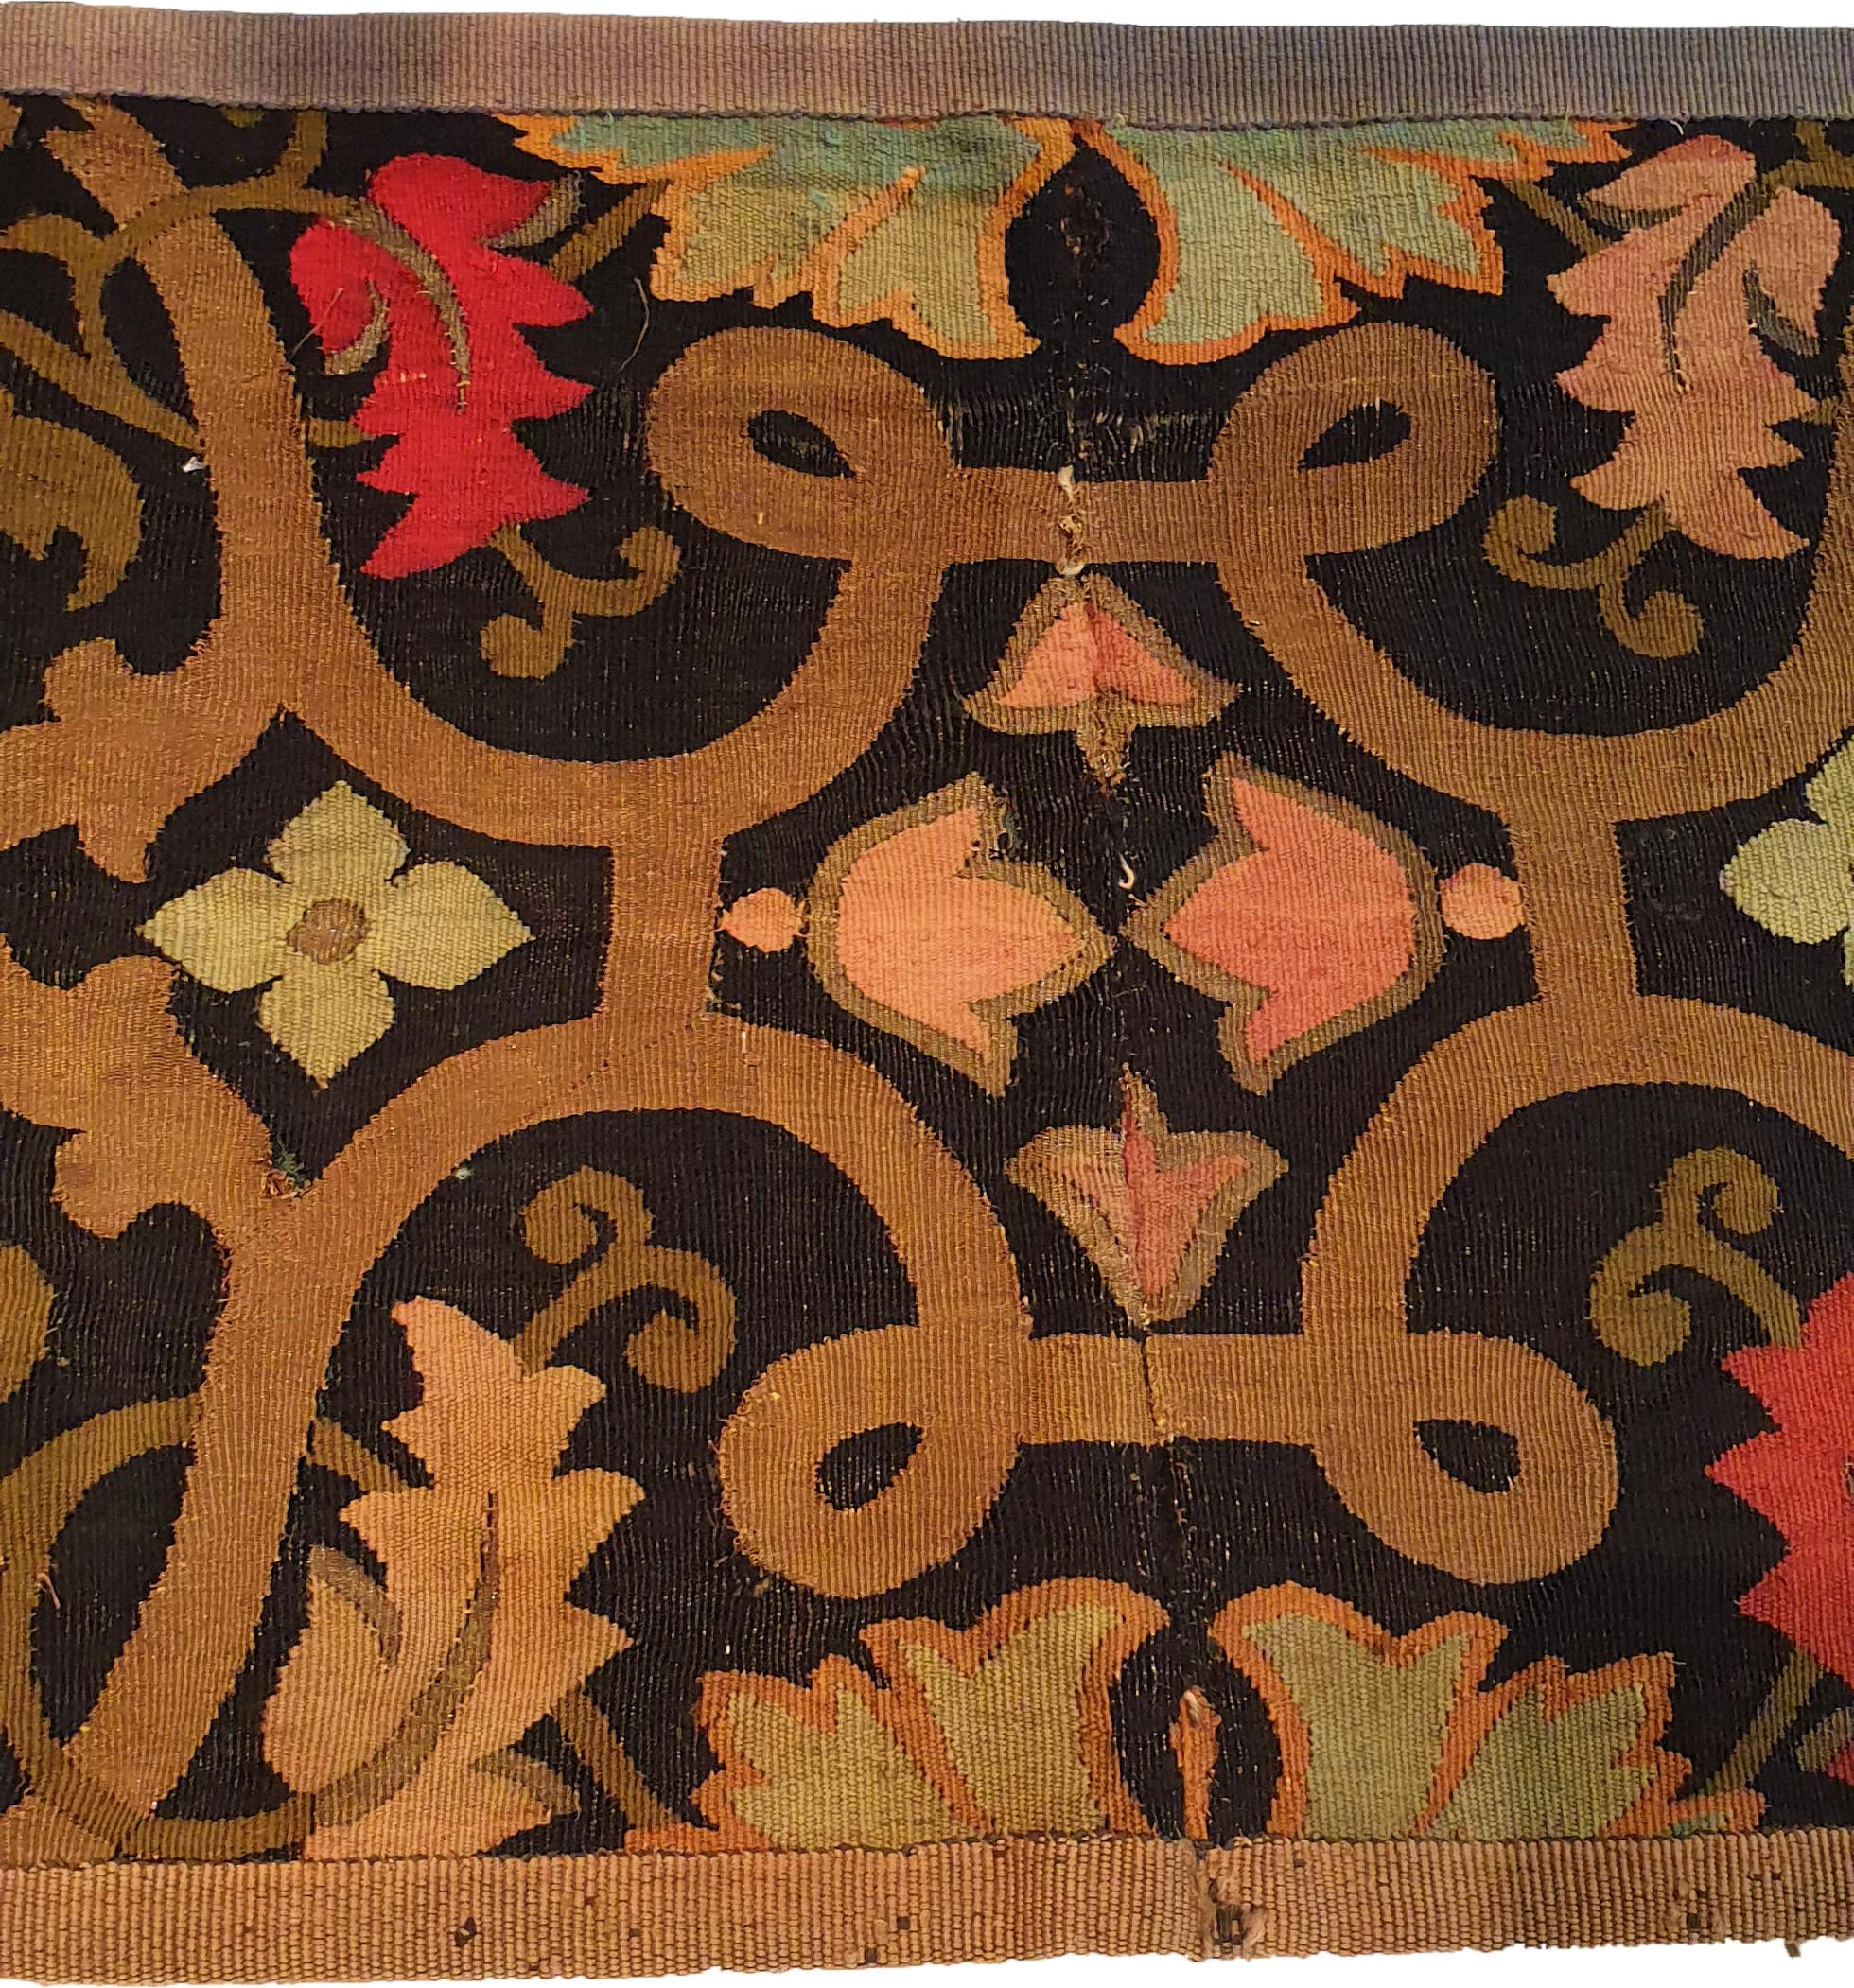 713 - pieces of Aubusson wool and metal rugs.